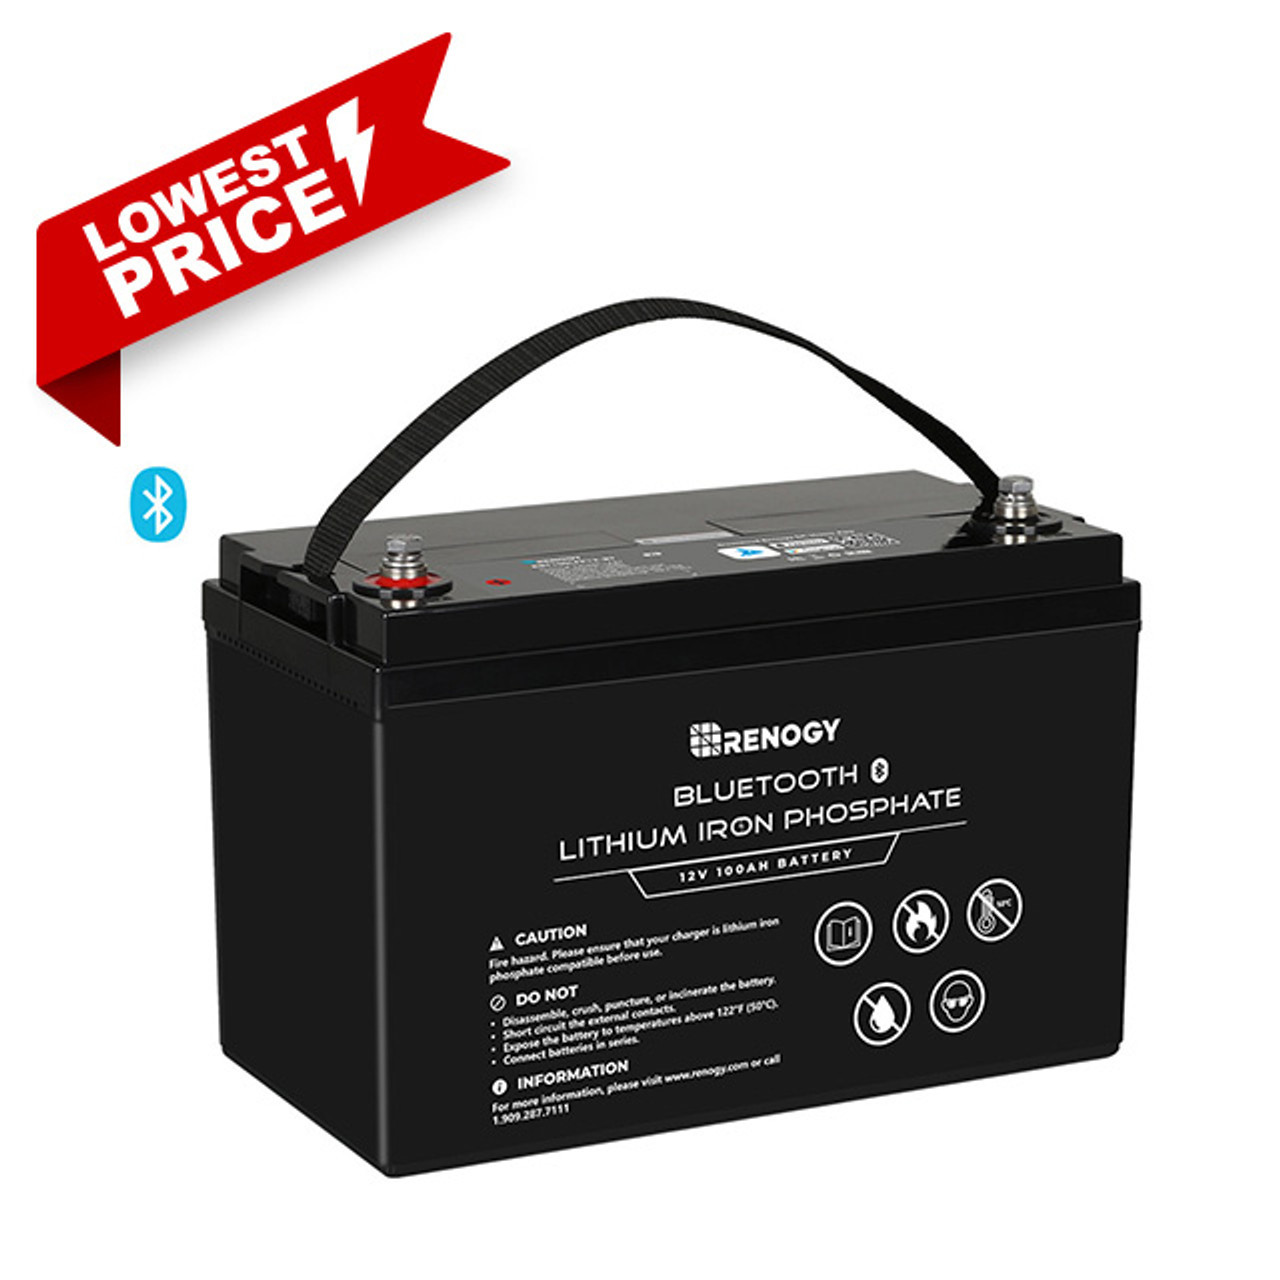 12V 100Ah Pro Deep Cycle Lithium Iron Phosphate Battery self-heating  w/Bluetooth